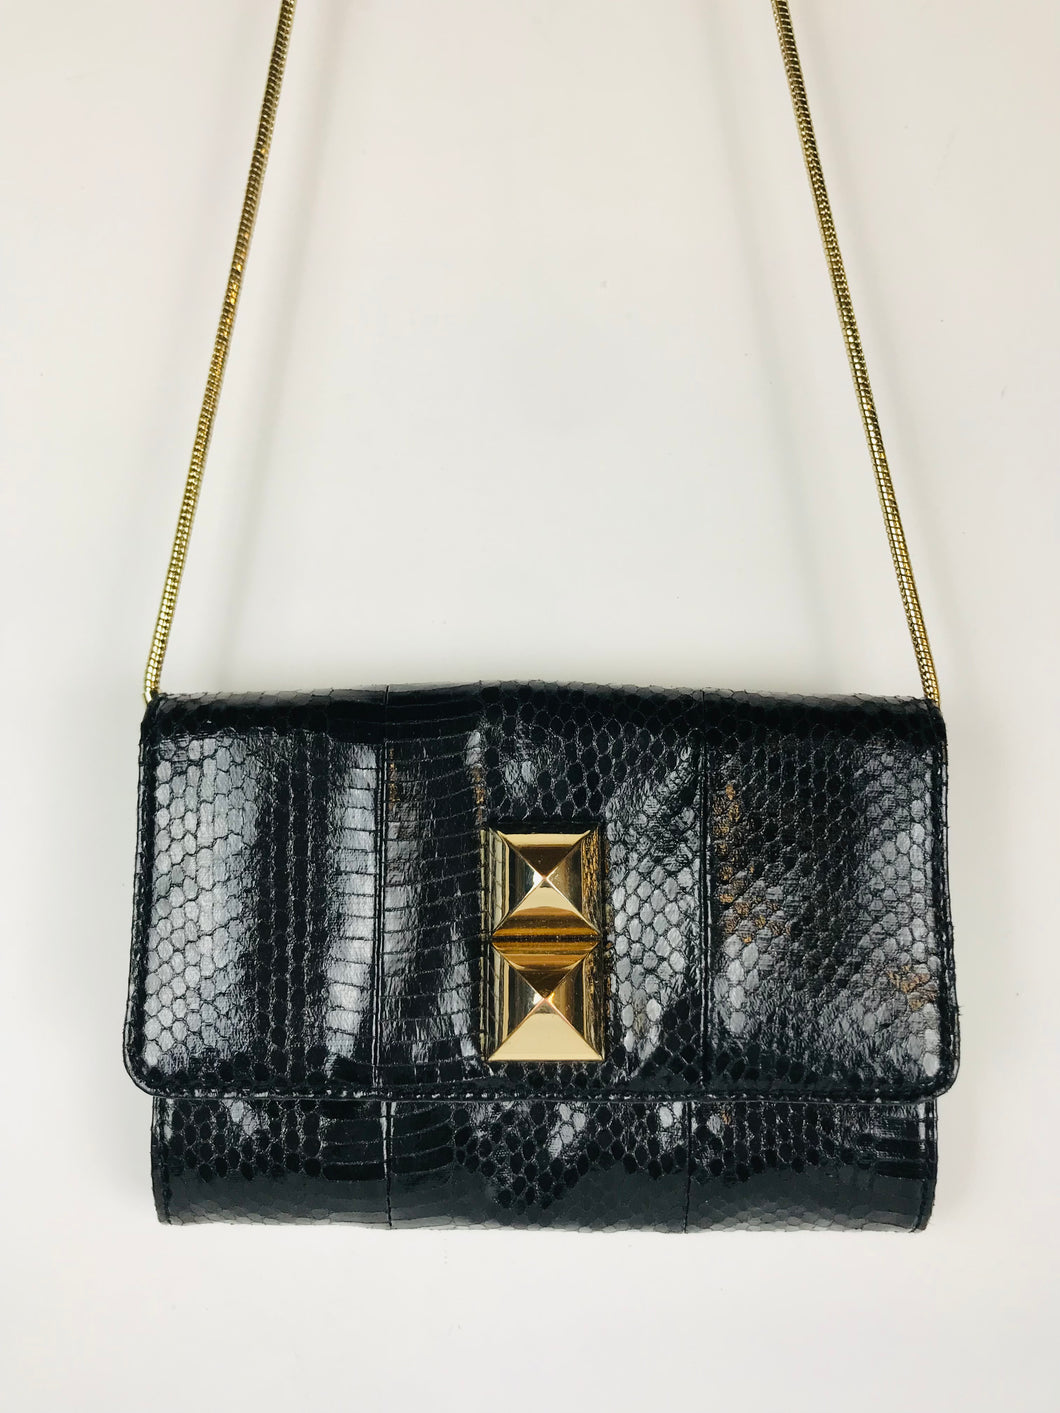 Juicy Couture Women's Snakeskin Purse | One size | Black